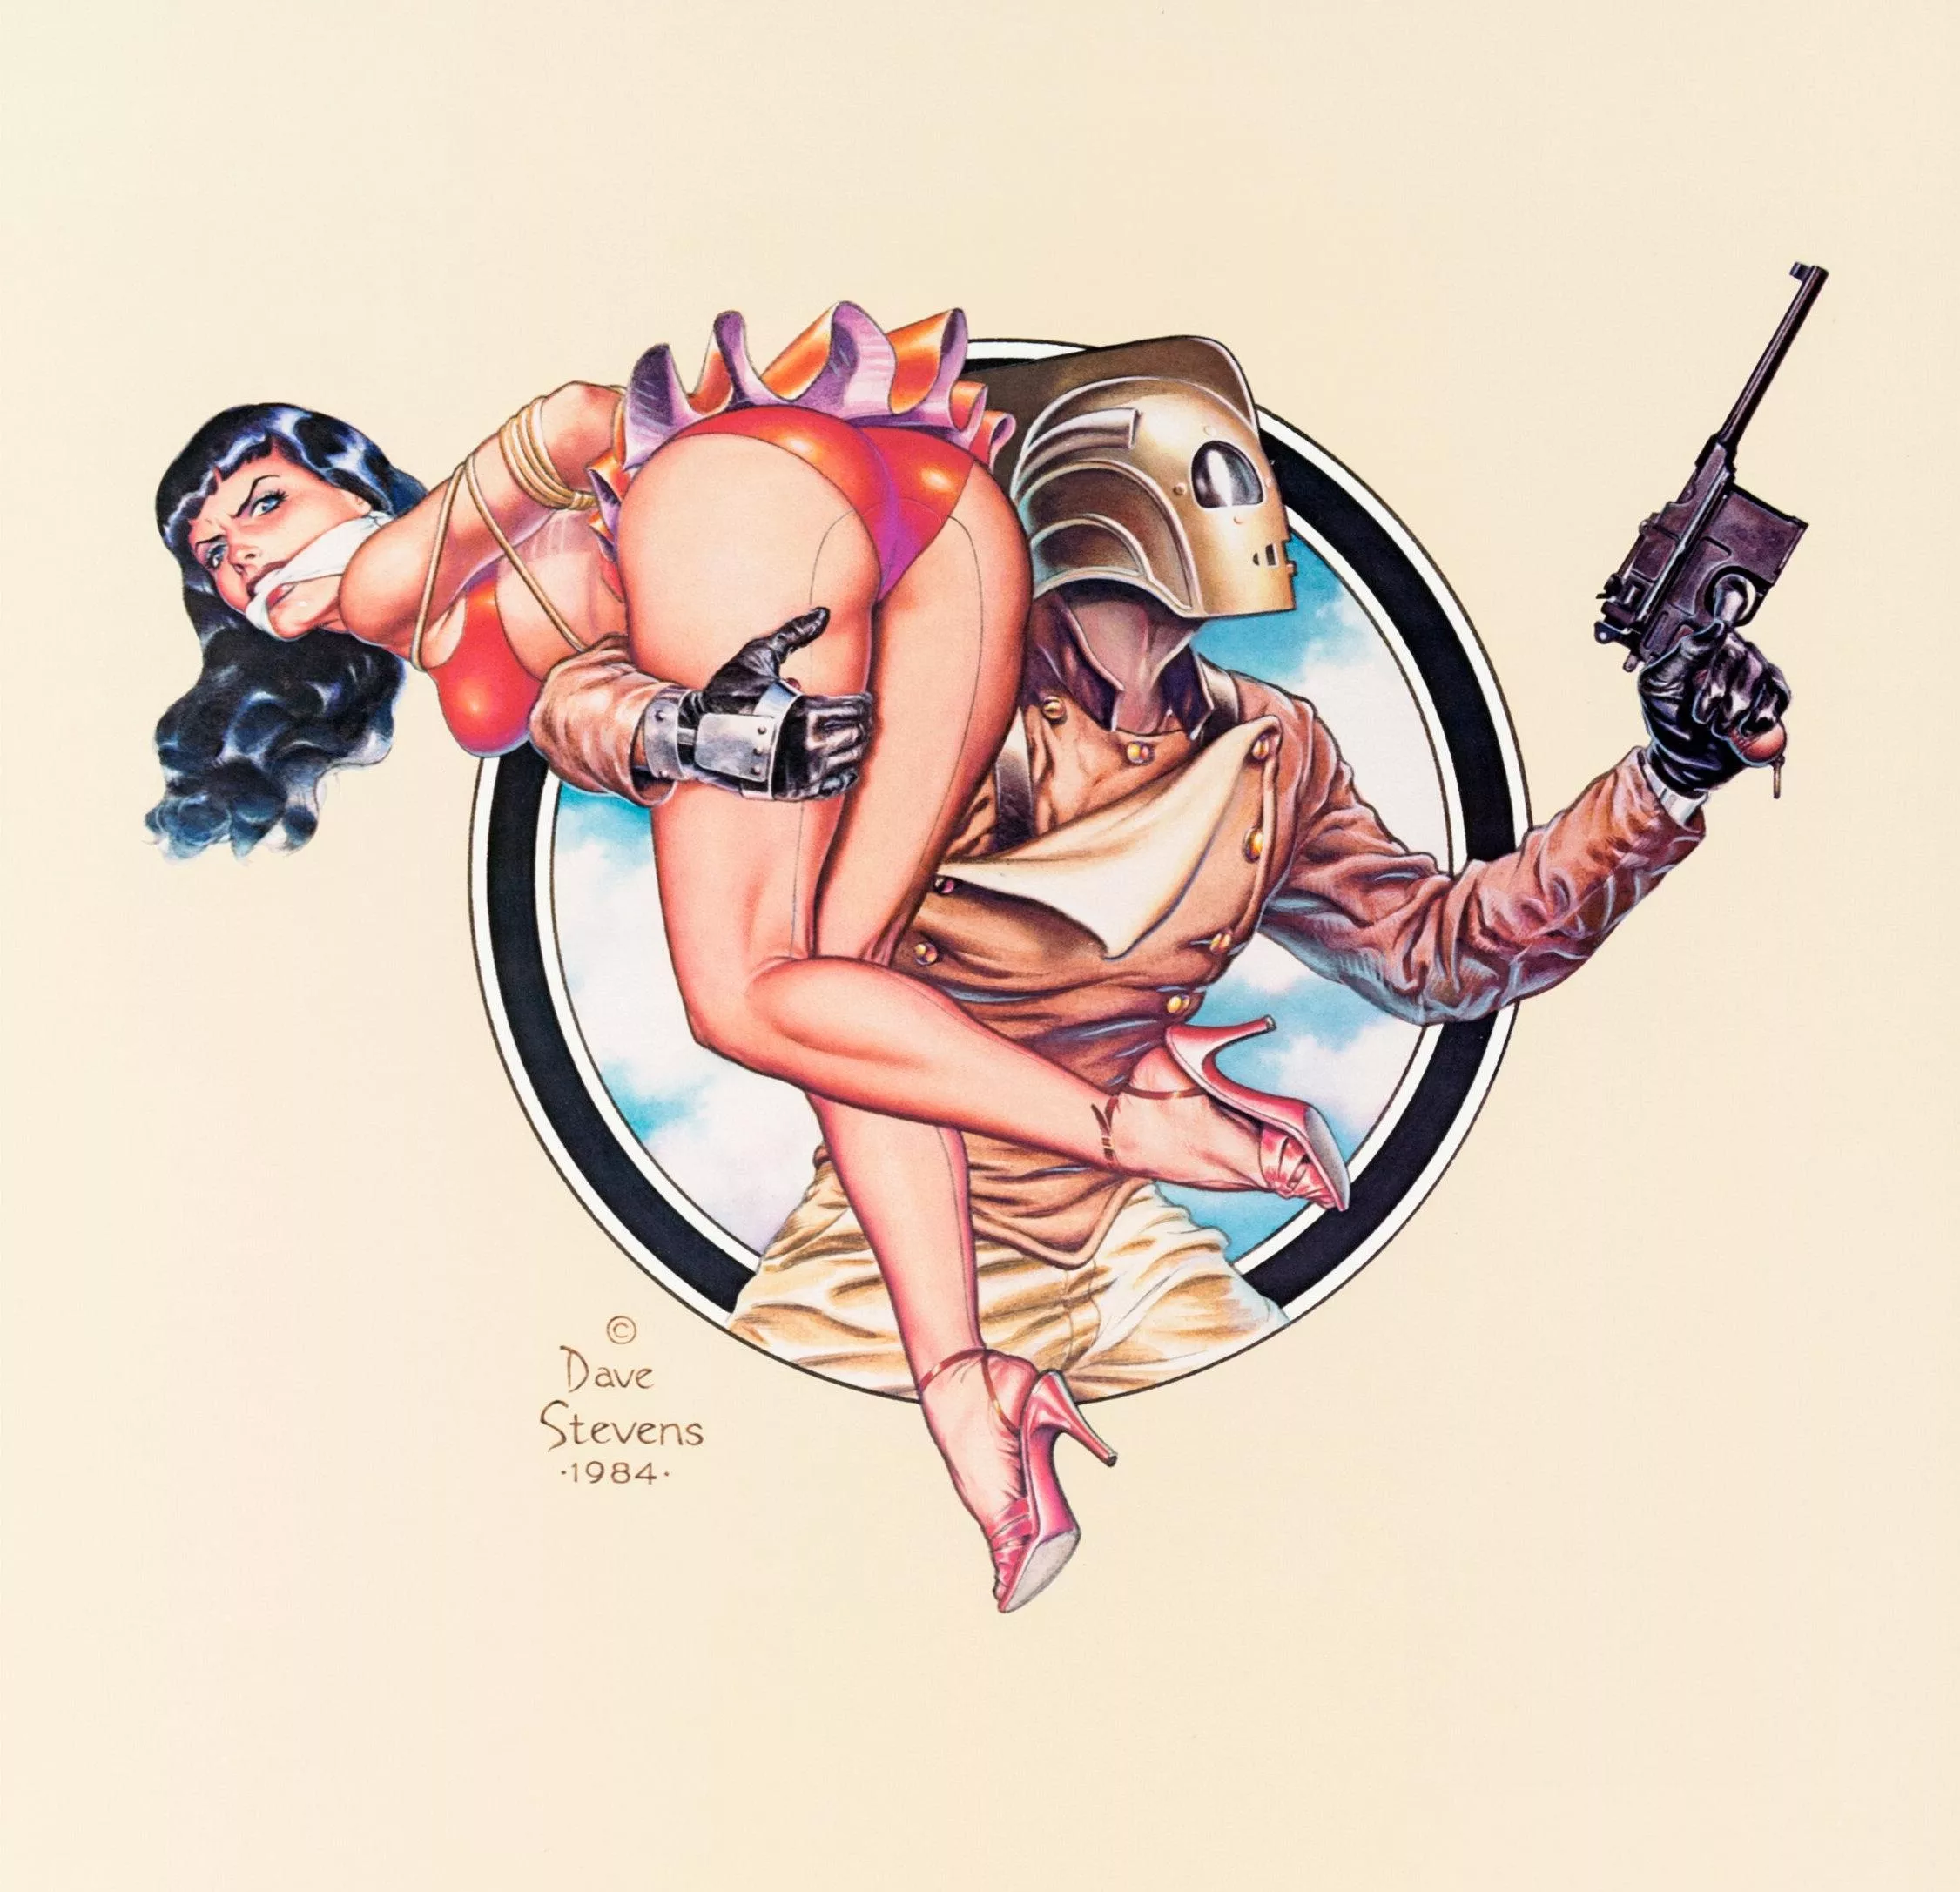 rocketeer and bettie page by dave stevens 1984.